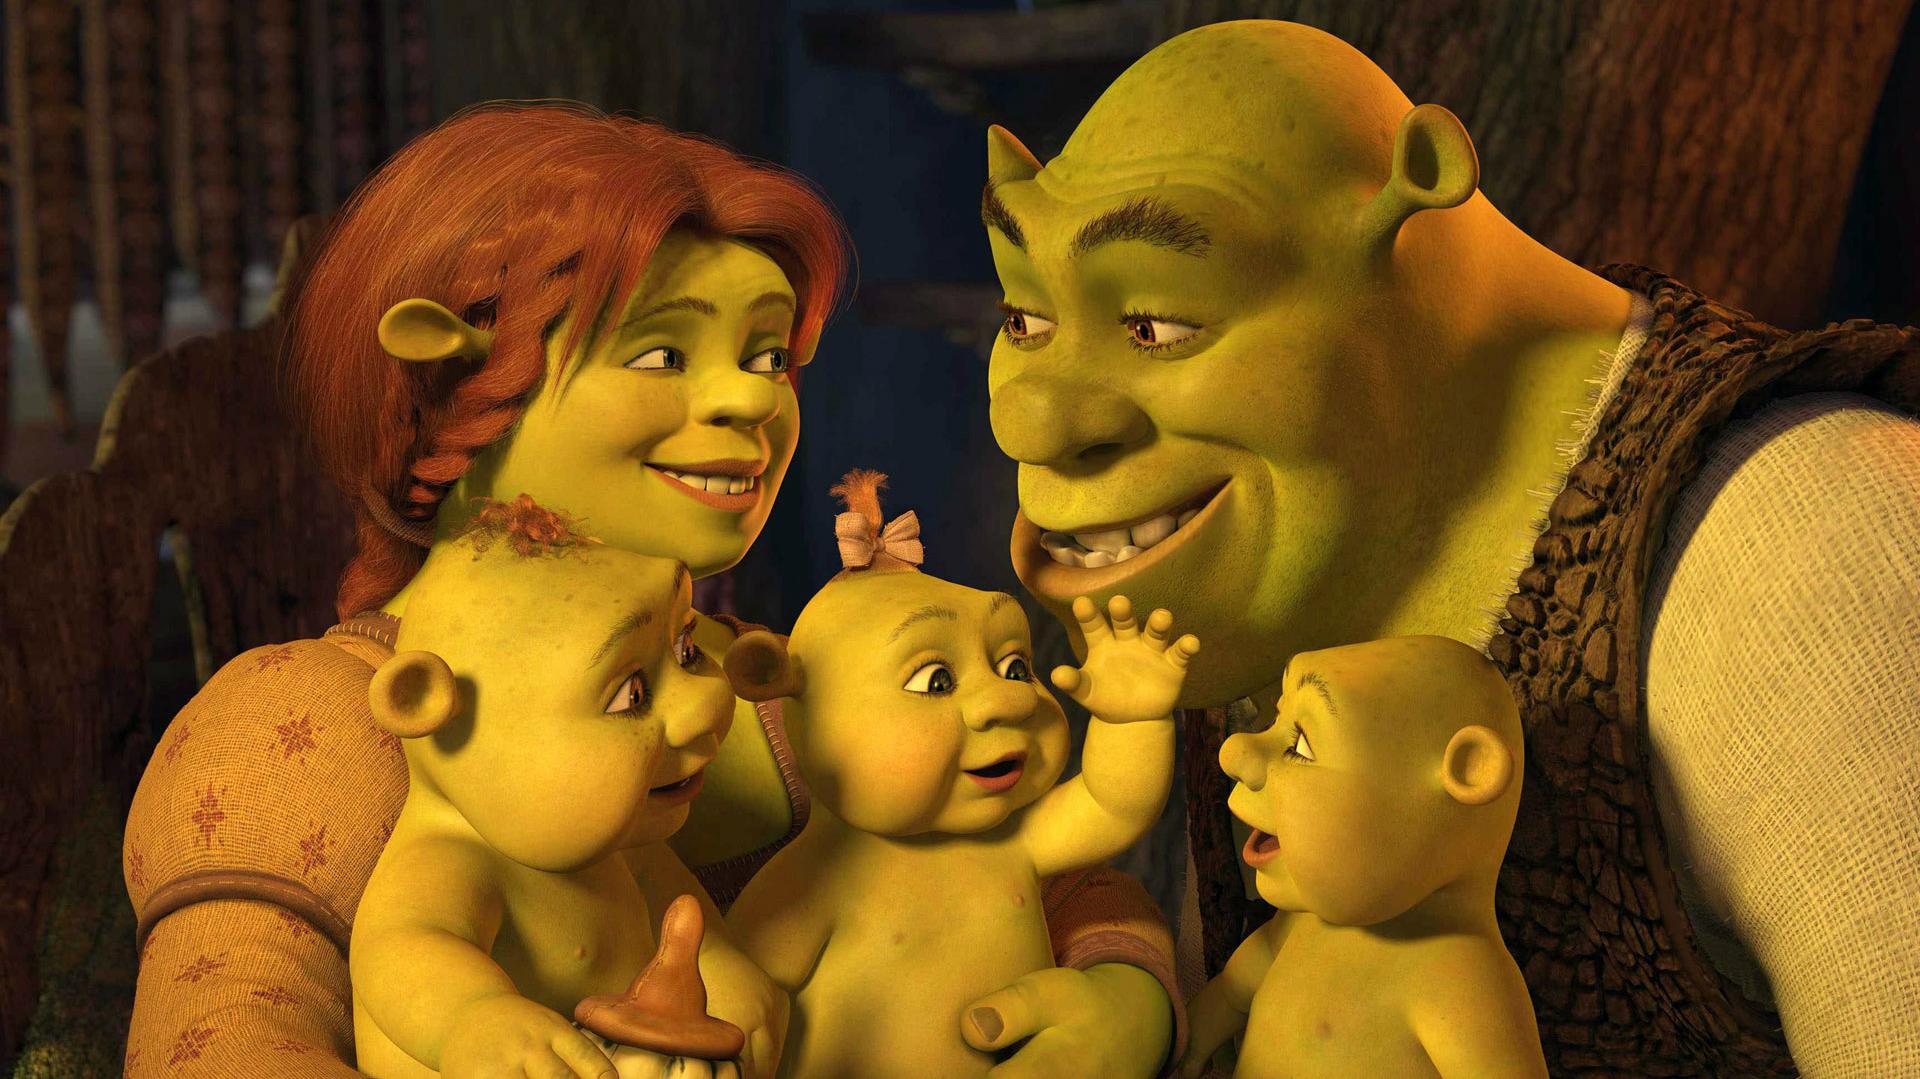 Shrek 5 Writer Claims He Is Reinventing The Franchise The Independent